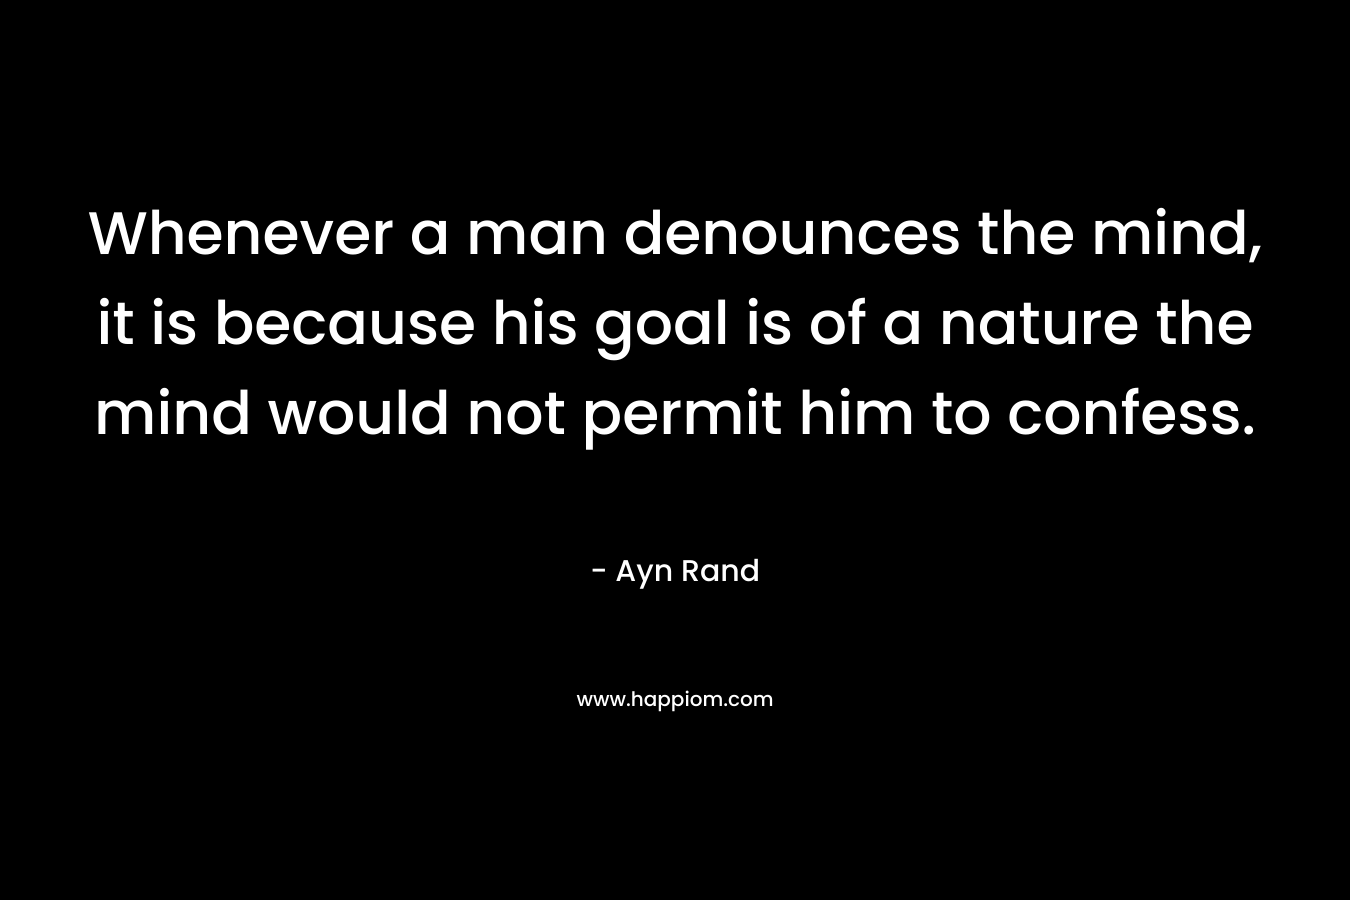 Whenever a man denounces the mind, it is because his goal is of a nature the mind would not permit him to confess.